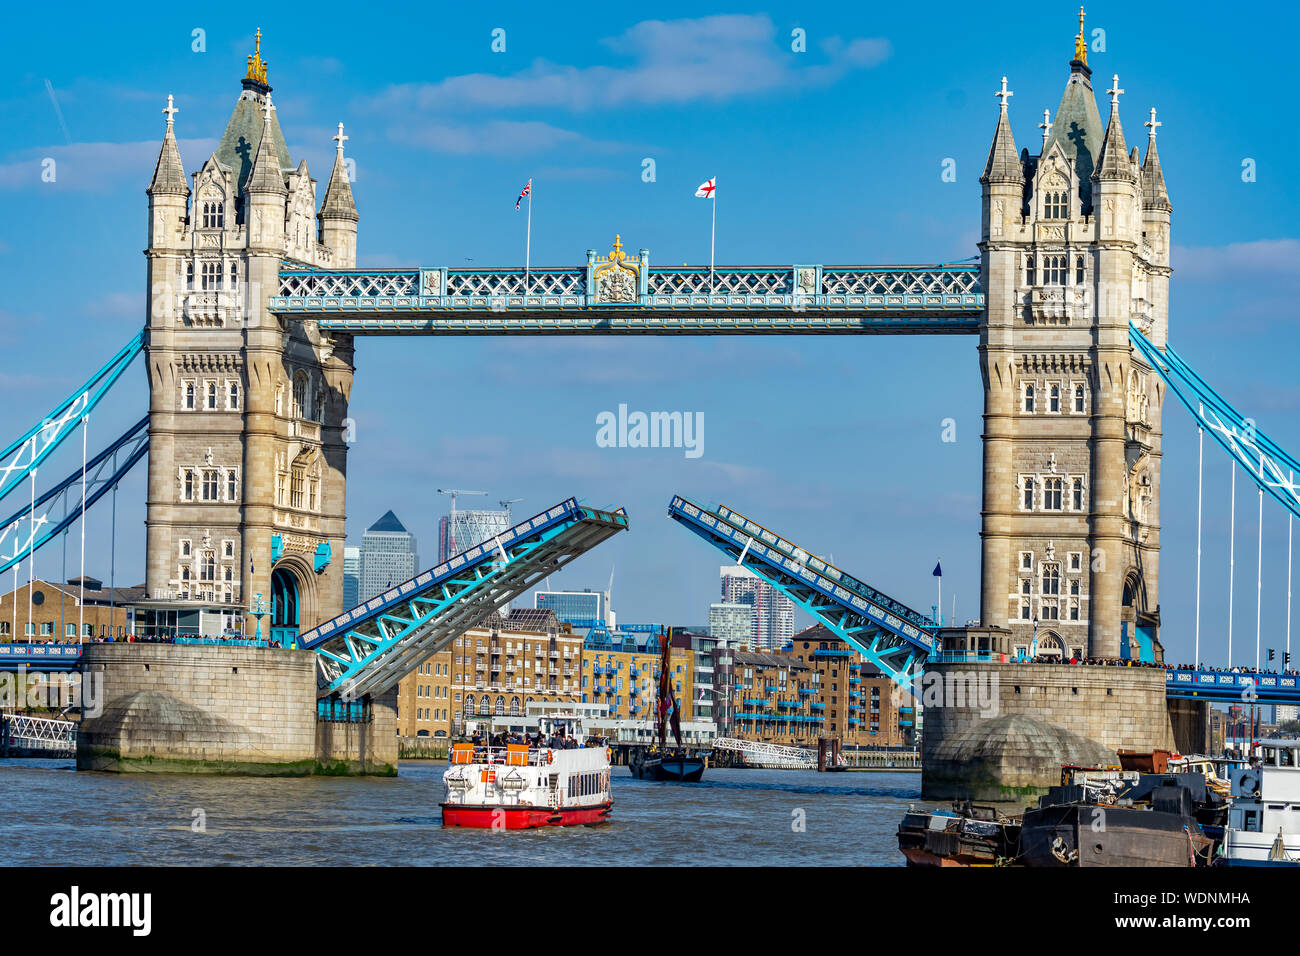 Close-up view of the famous landmark of London Tower Bridge with open gates in England, UK Stock Photo